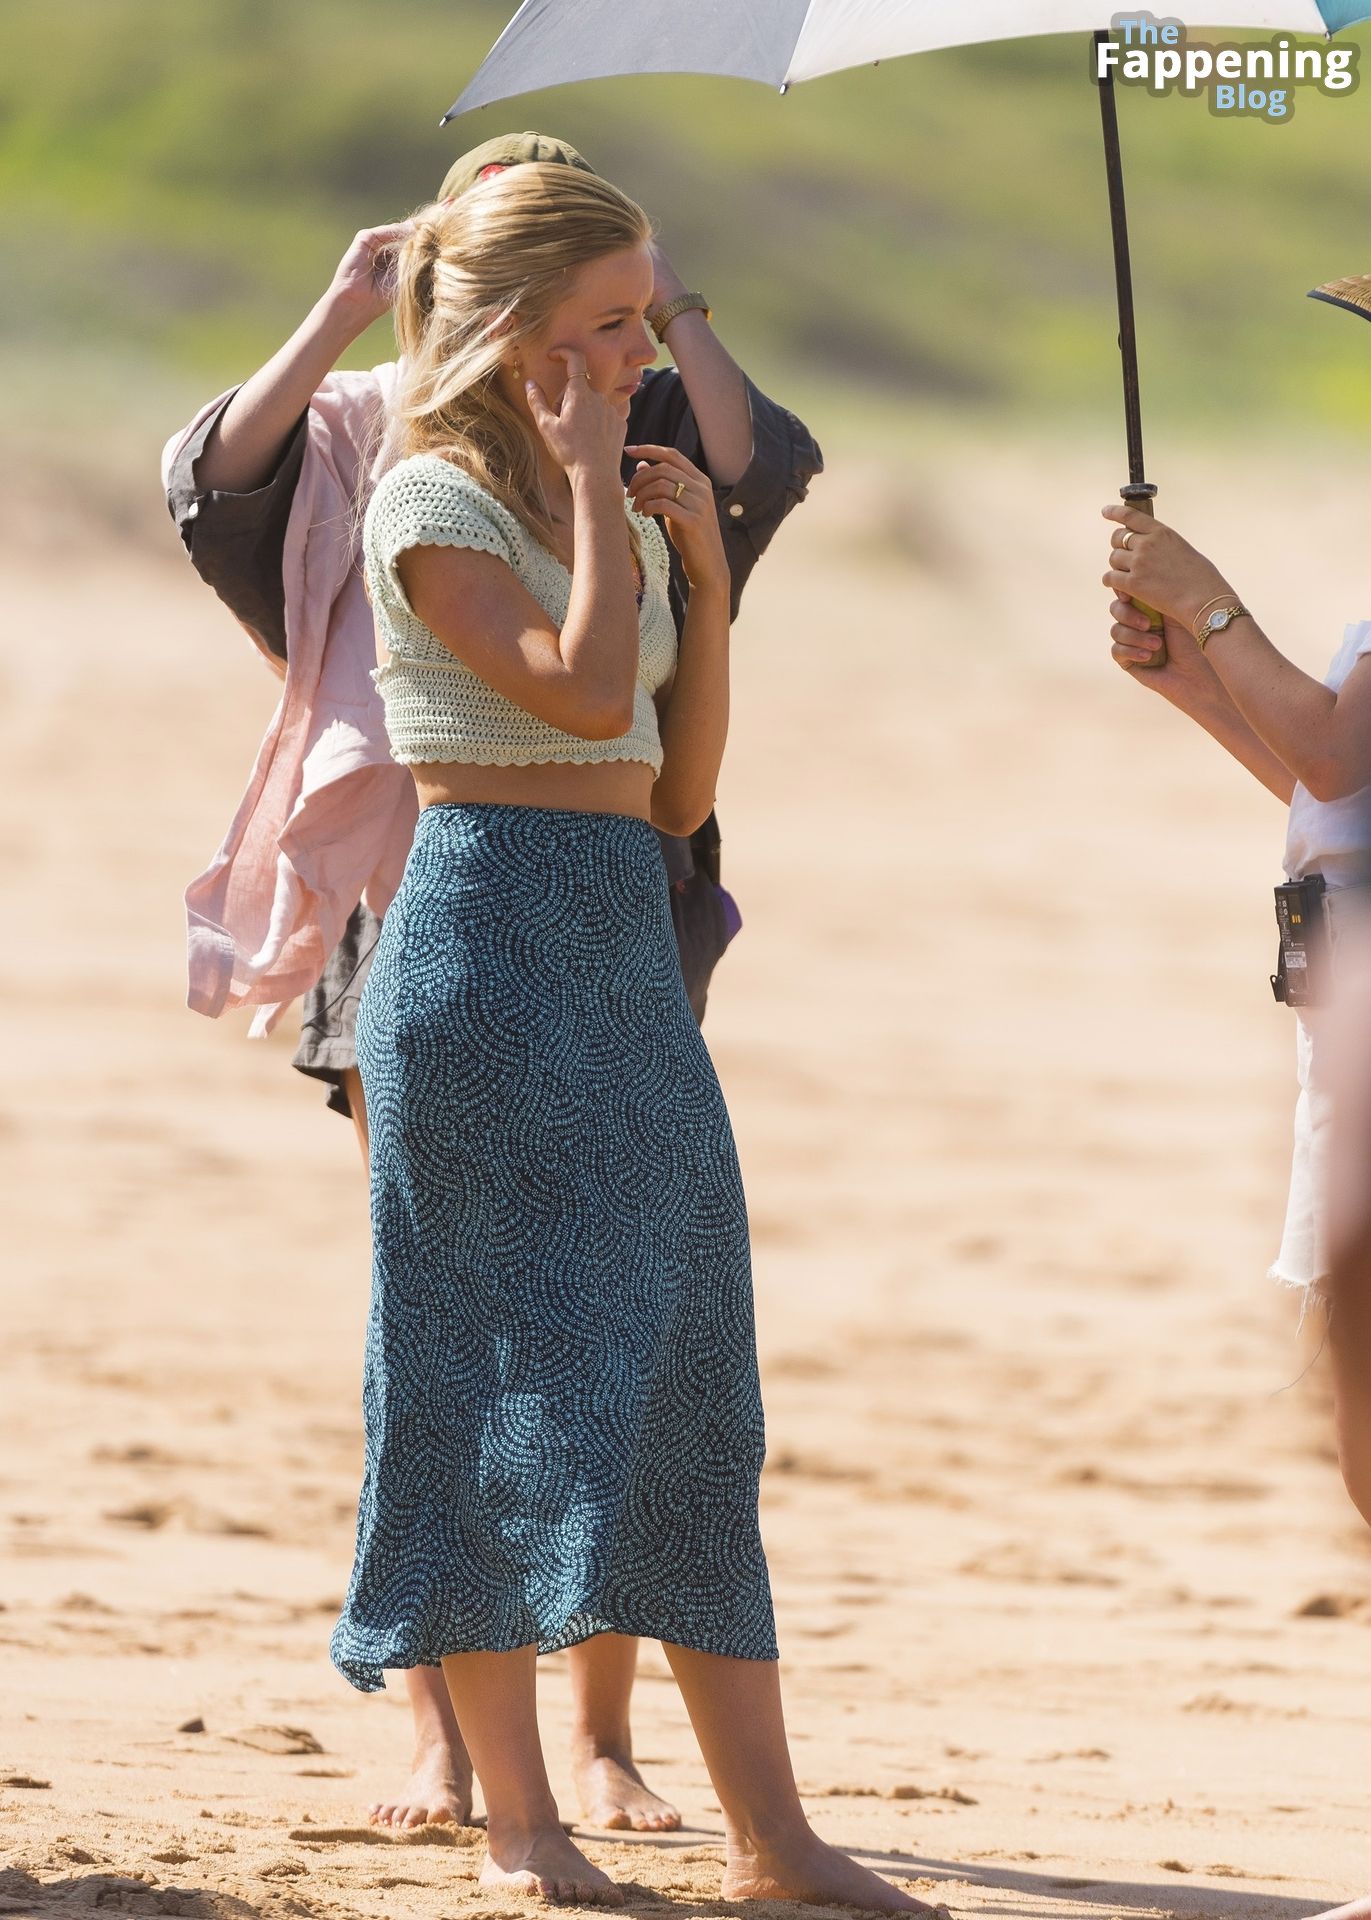 Sydney Sweeney, Glen Powell and Cast Heat Up the Screen with Steamy Beach Scenes for a New Film in Australia (127 Photos)